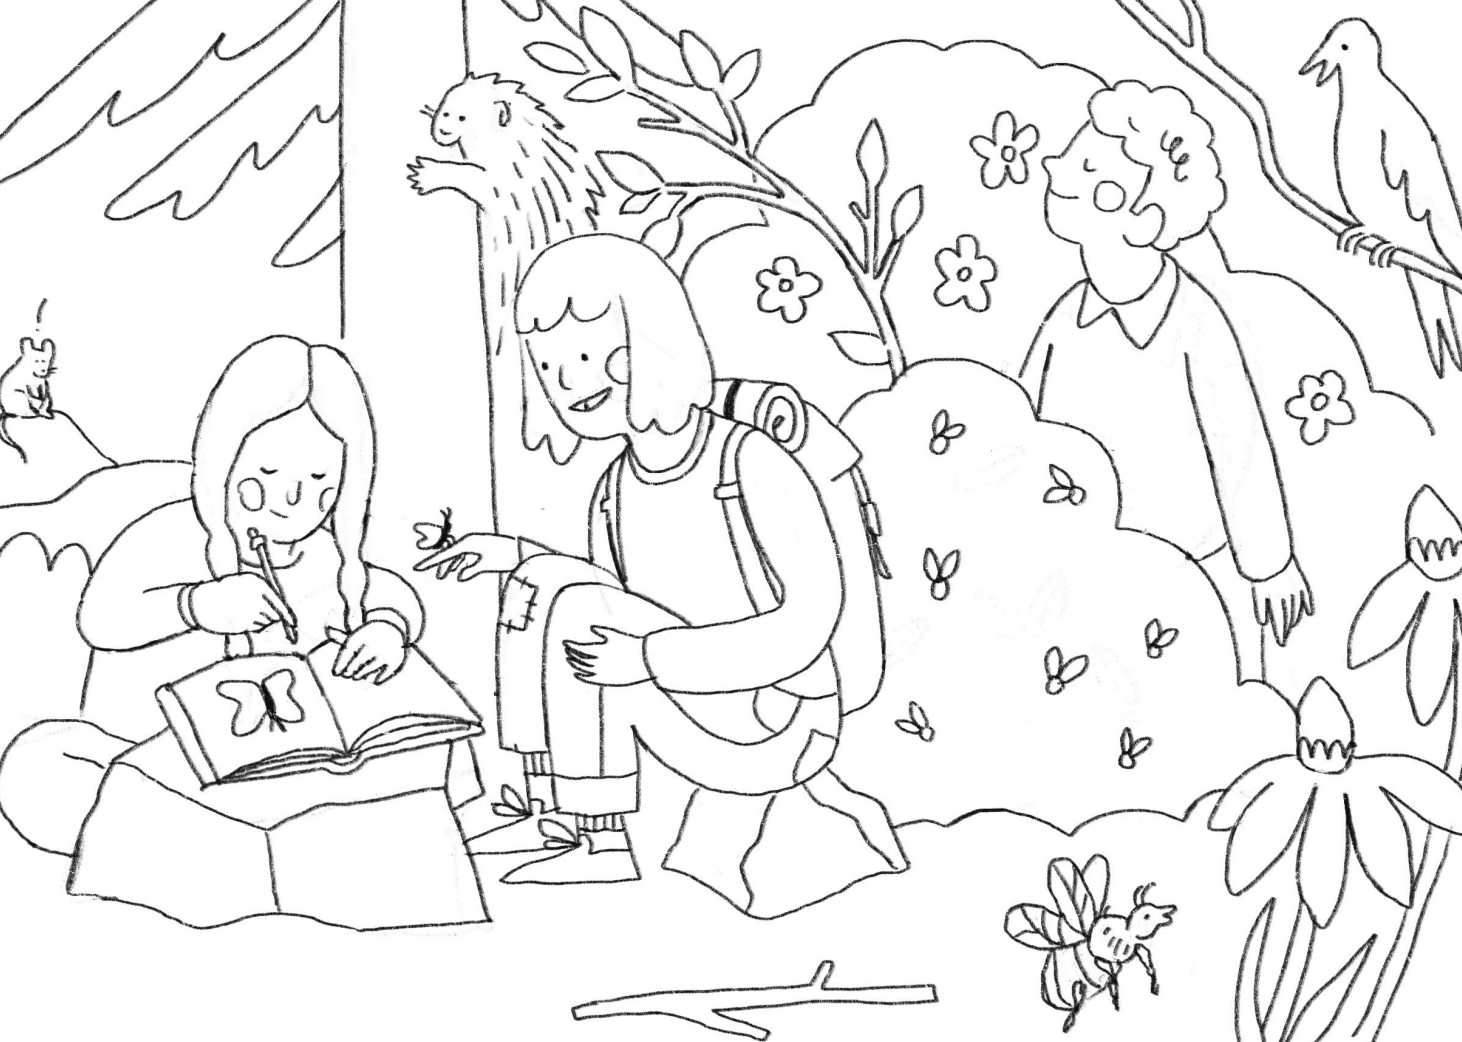 Featured image for “Outside in Nature Colouring Page”